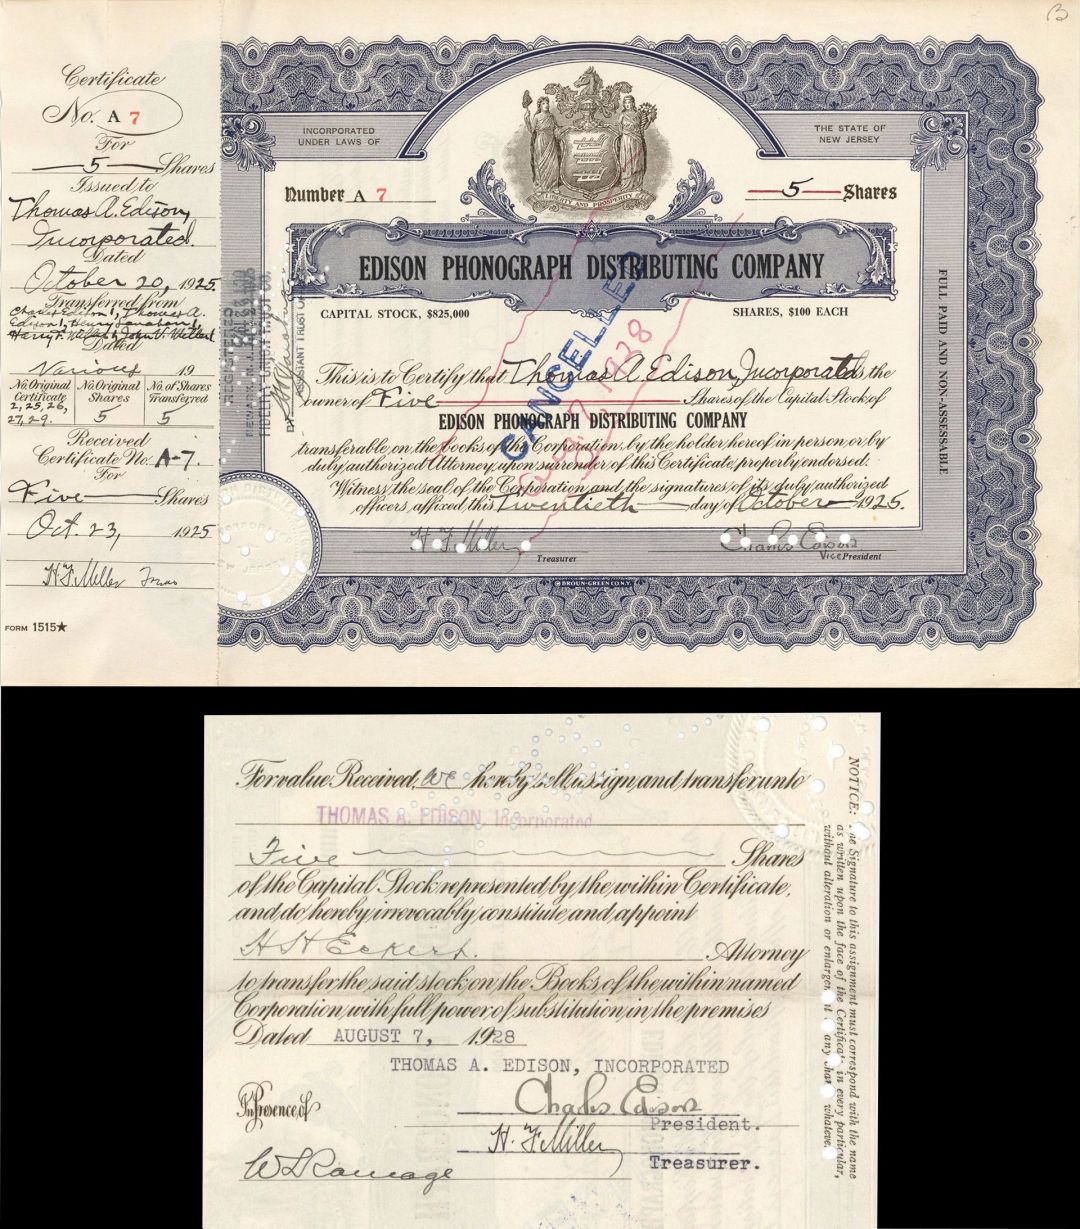 Edison Phonograph Distributing Co. signed by Charles Edison twice and Henry Miller - Stock Certificate